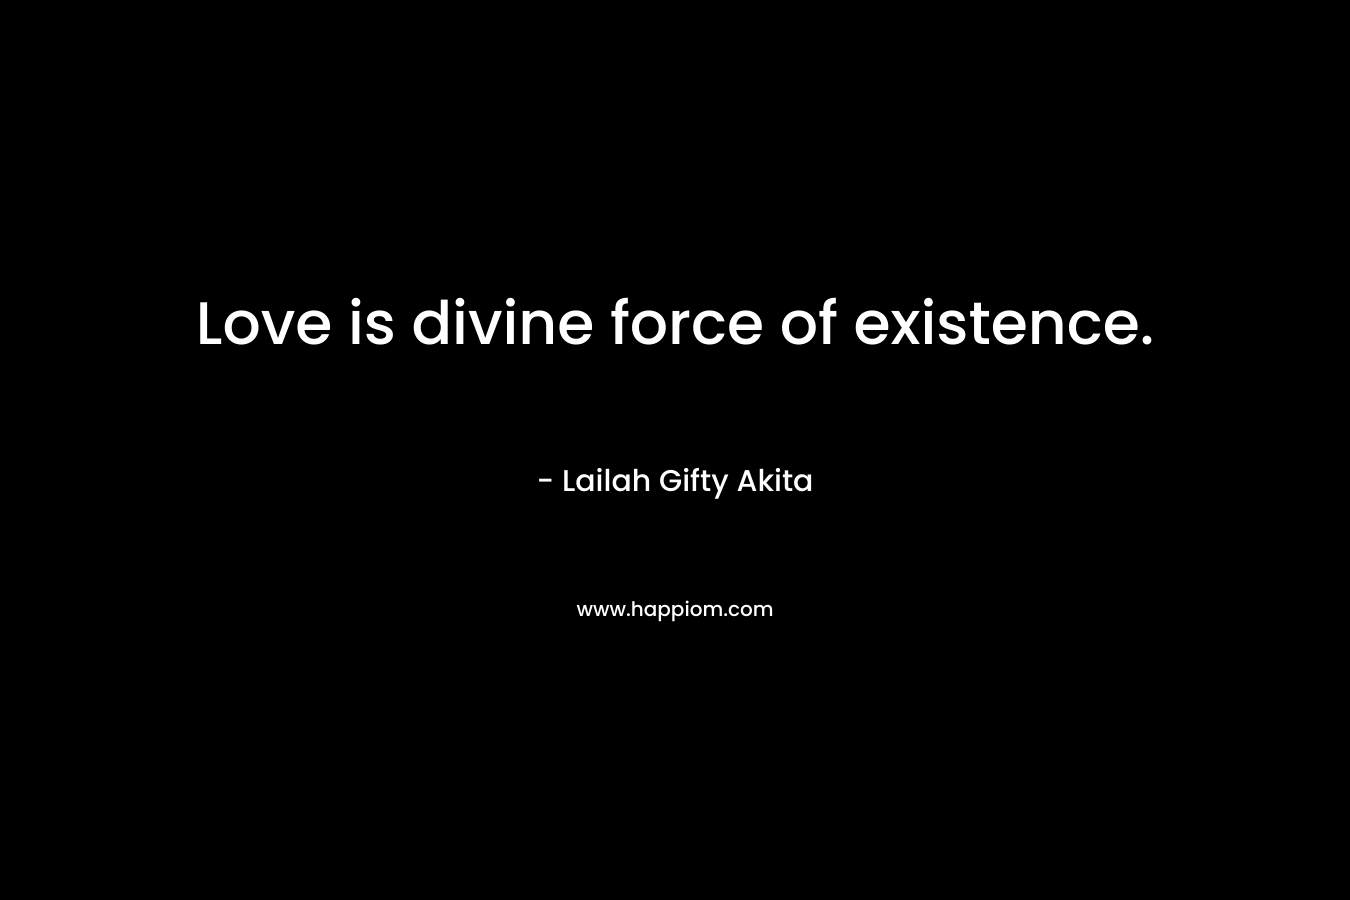 Love is divine force of existence.